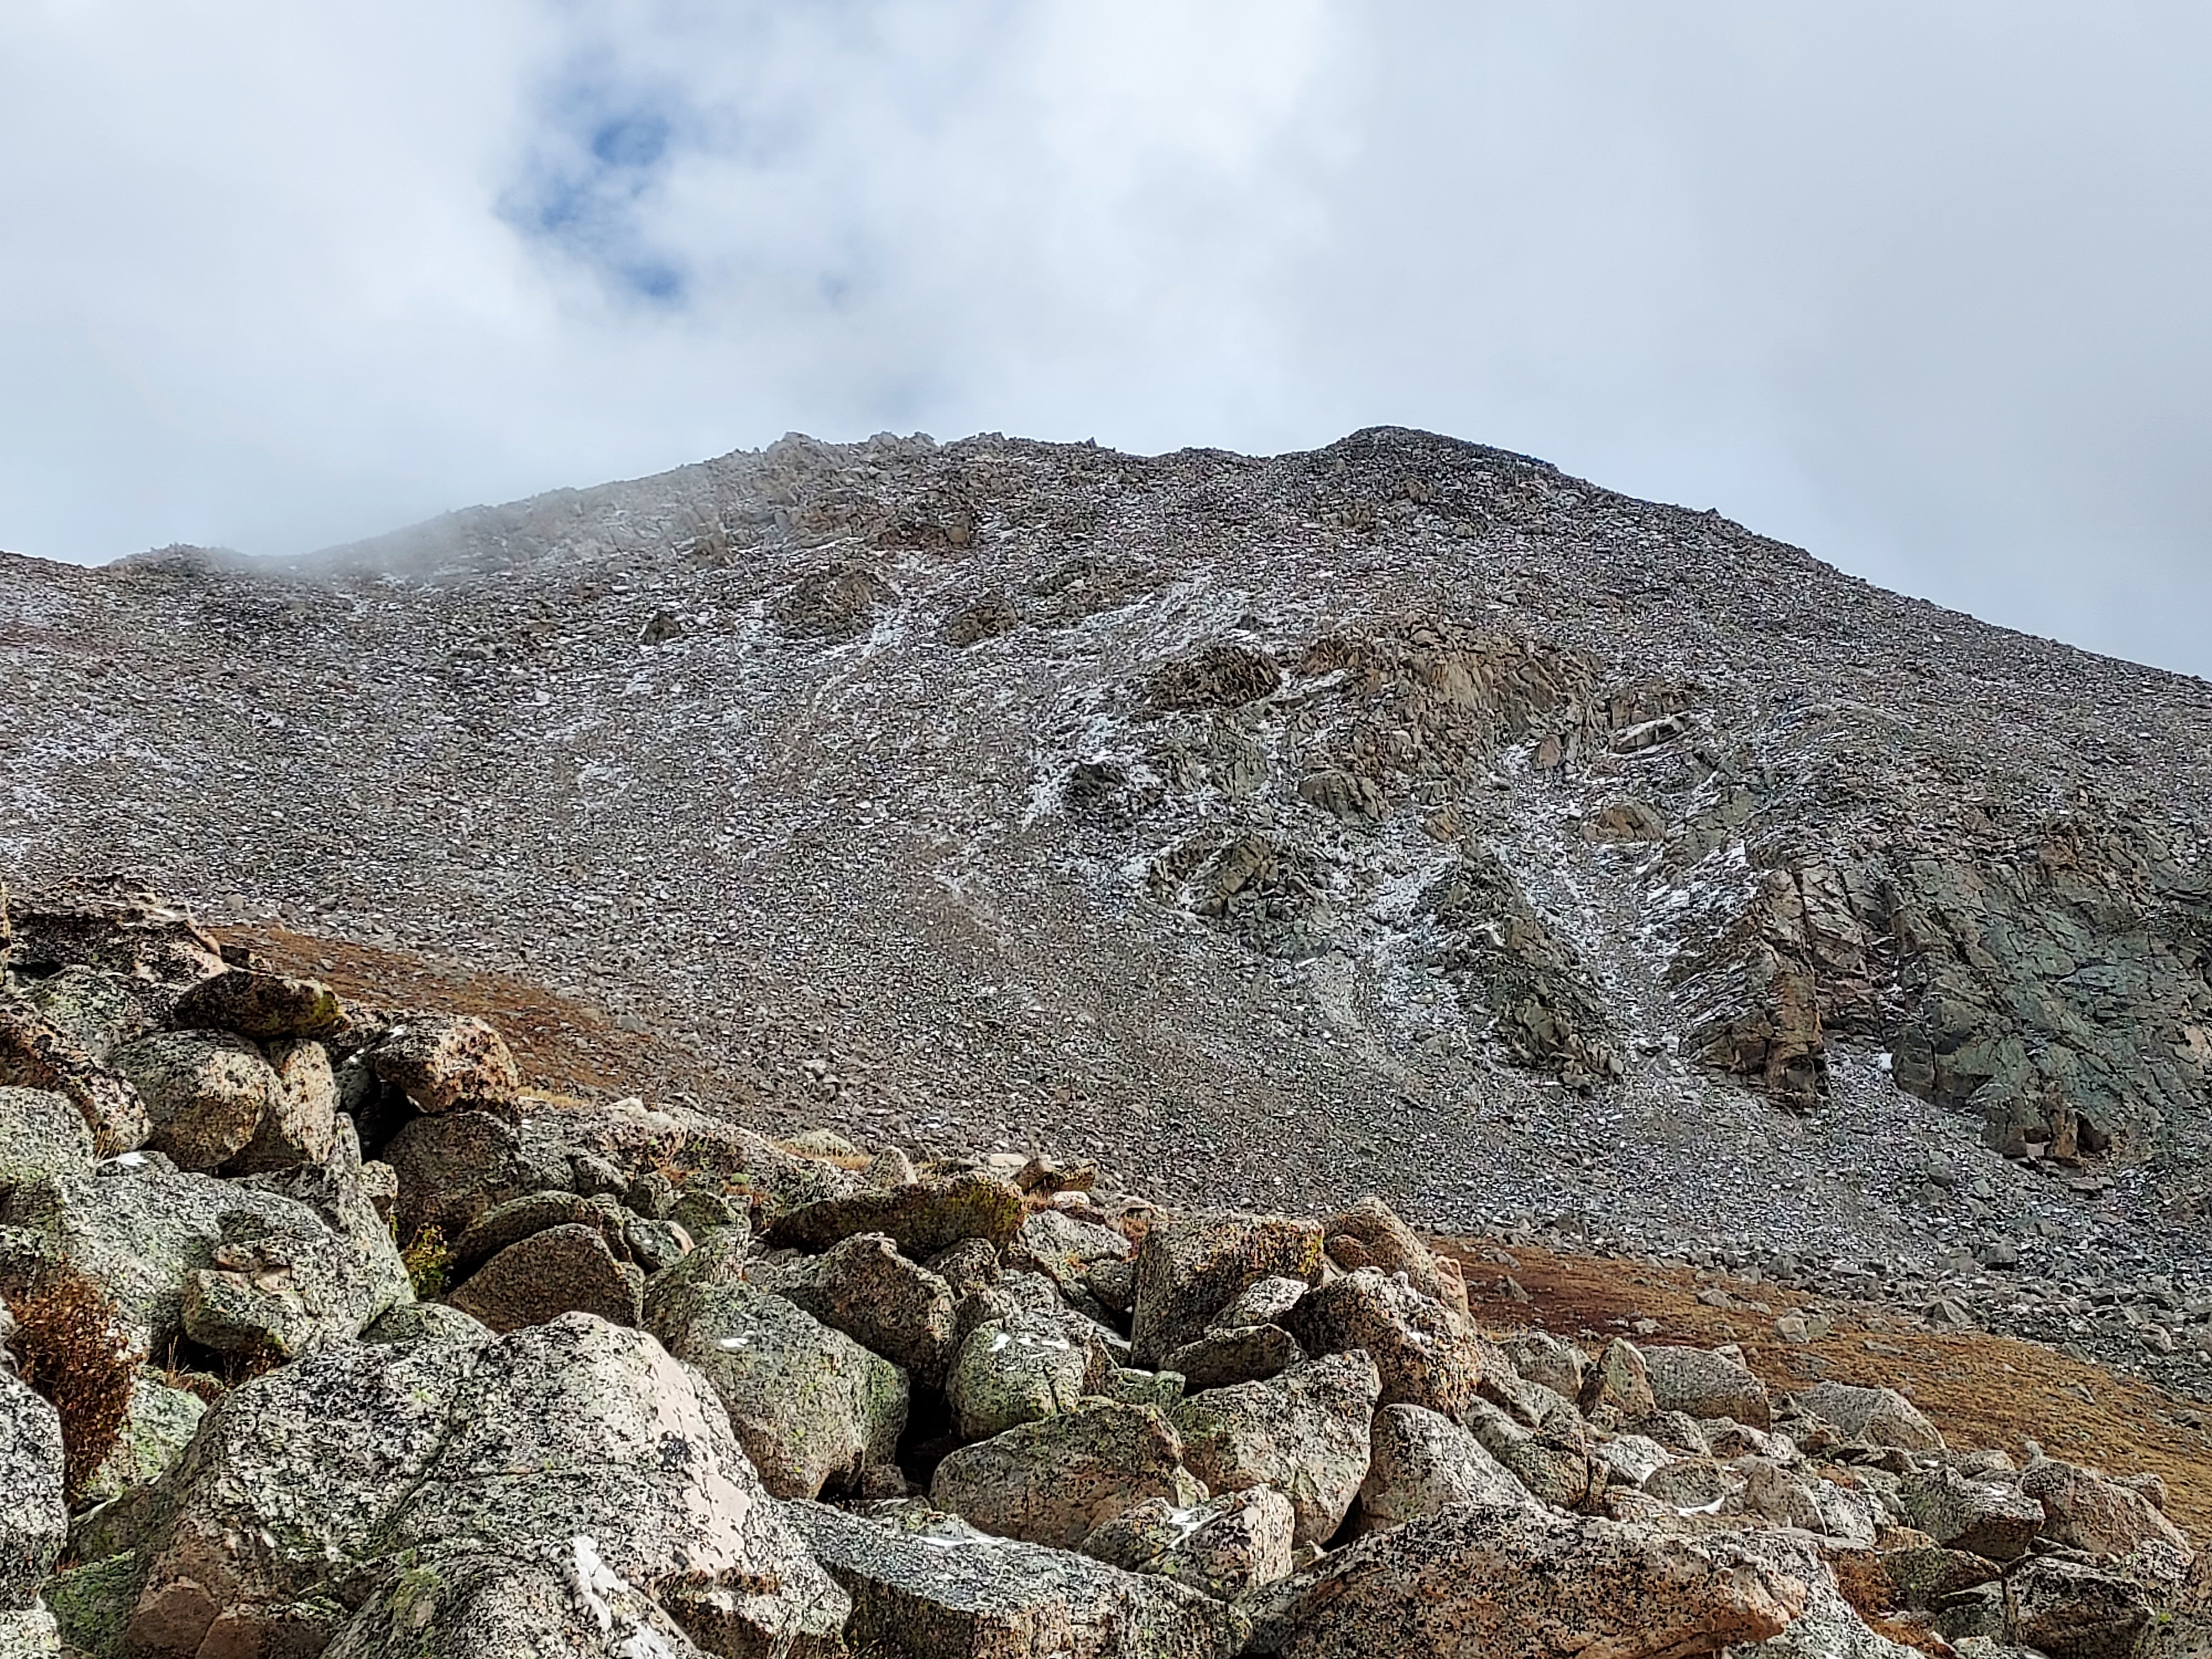 Mount Yale in October